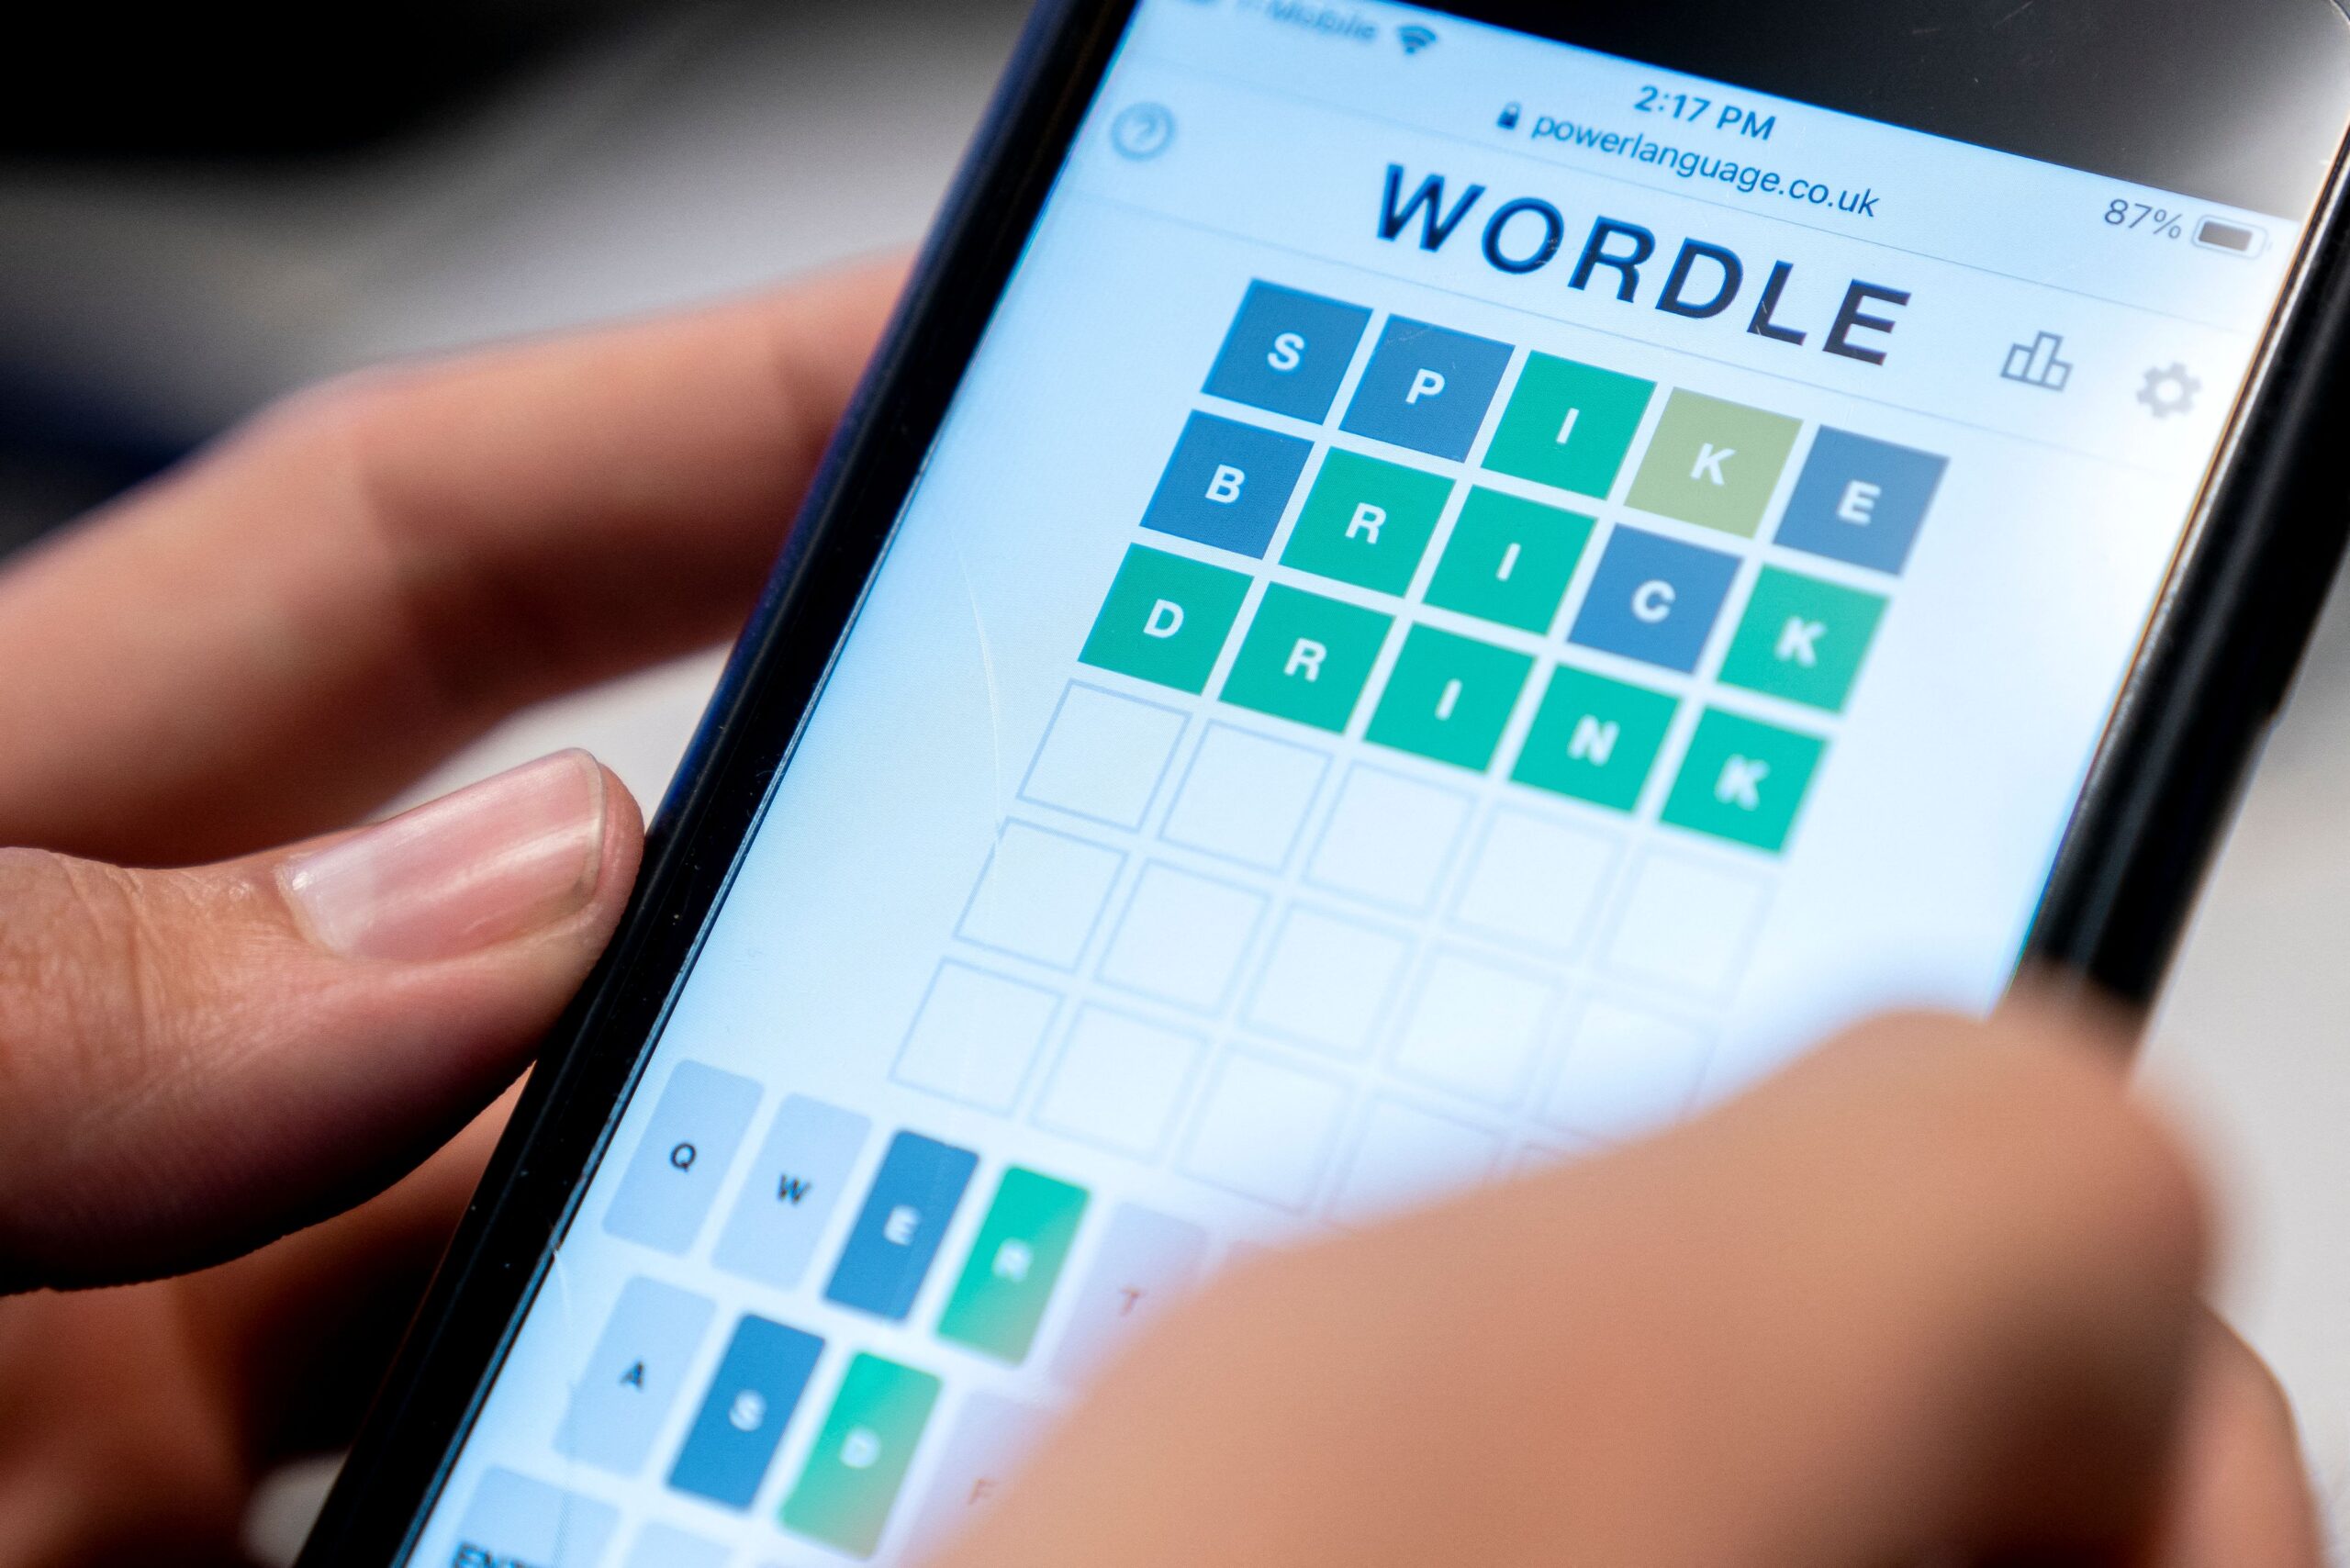 New York Times Buys Viral Game ‘Wordle’ for Amount ‘In the Low Seven Figures’